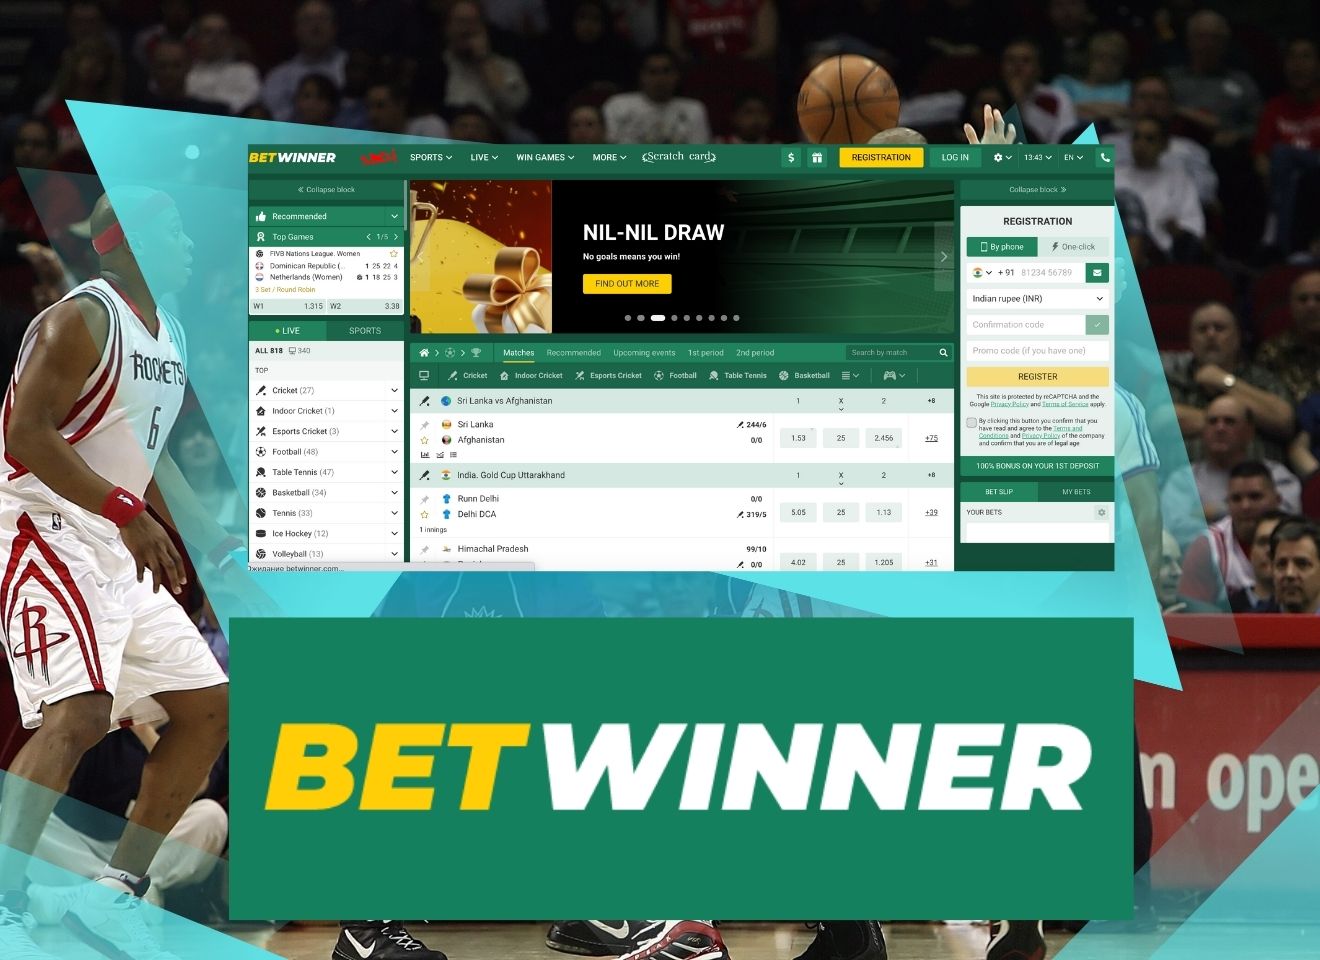 experience the thrill of betting on your favourite sports and events with Betwinner